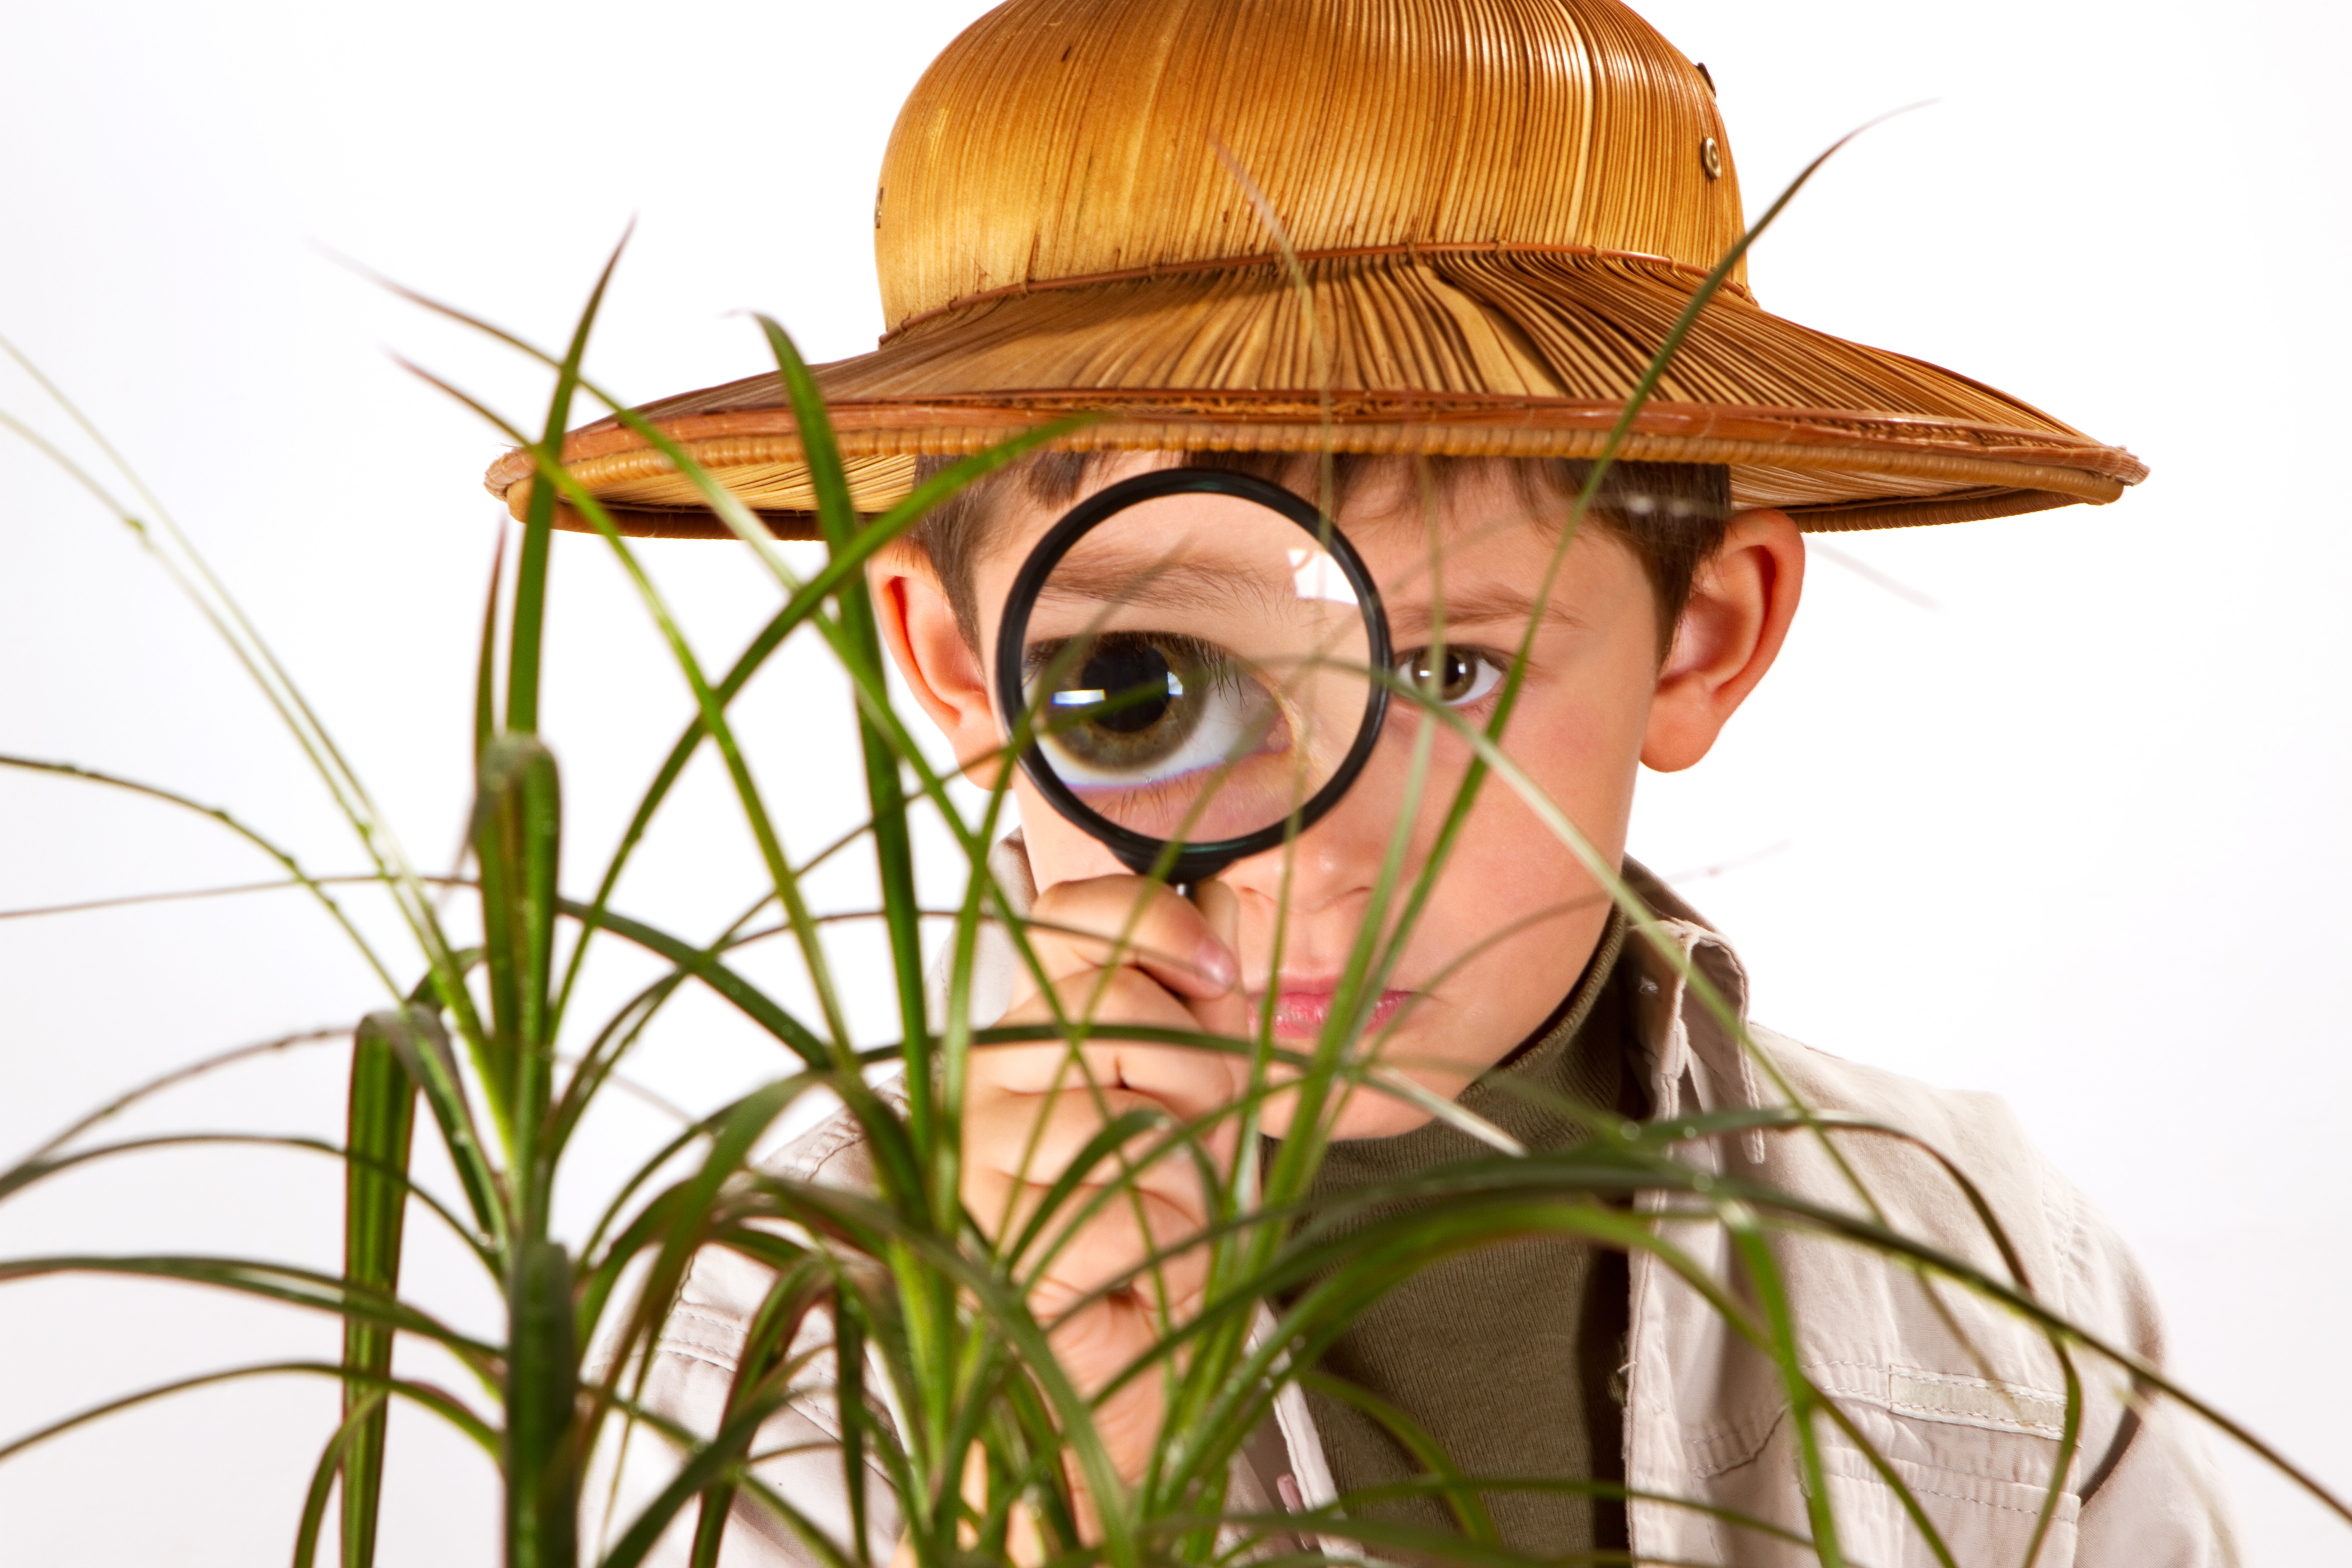 Image of young boy hiding behind tall grass holding a magnifying glass up to his eye